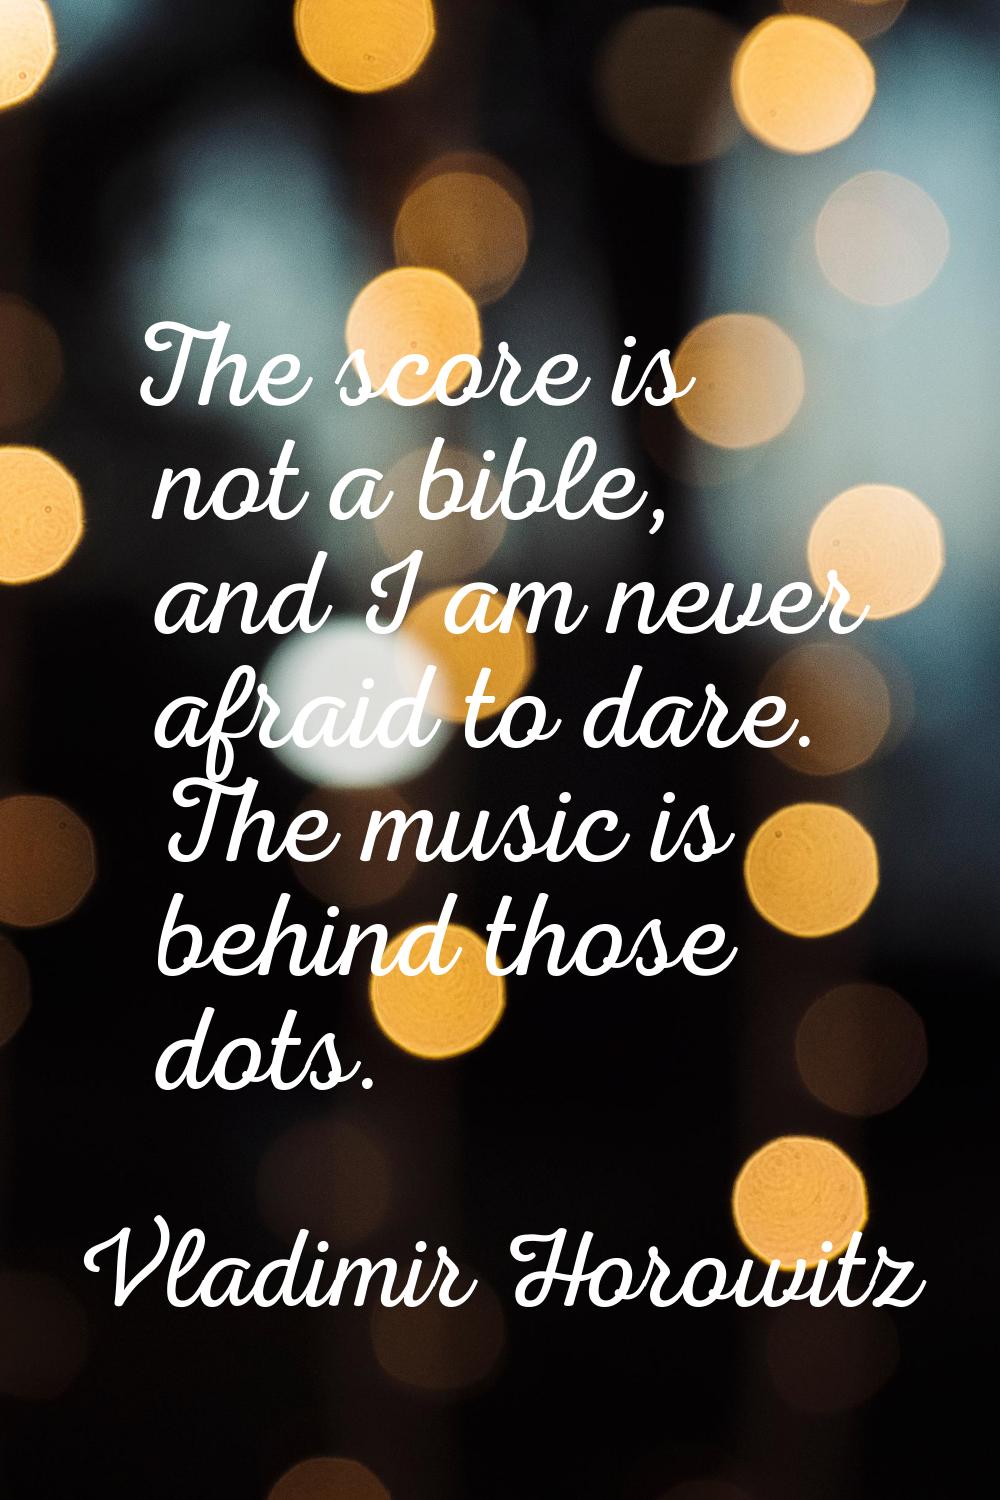 The score is not a bible, and I am never afraid to dare. The music is behind those dots.